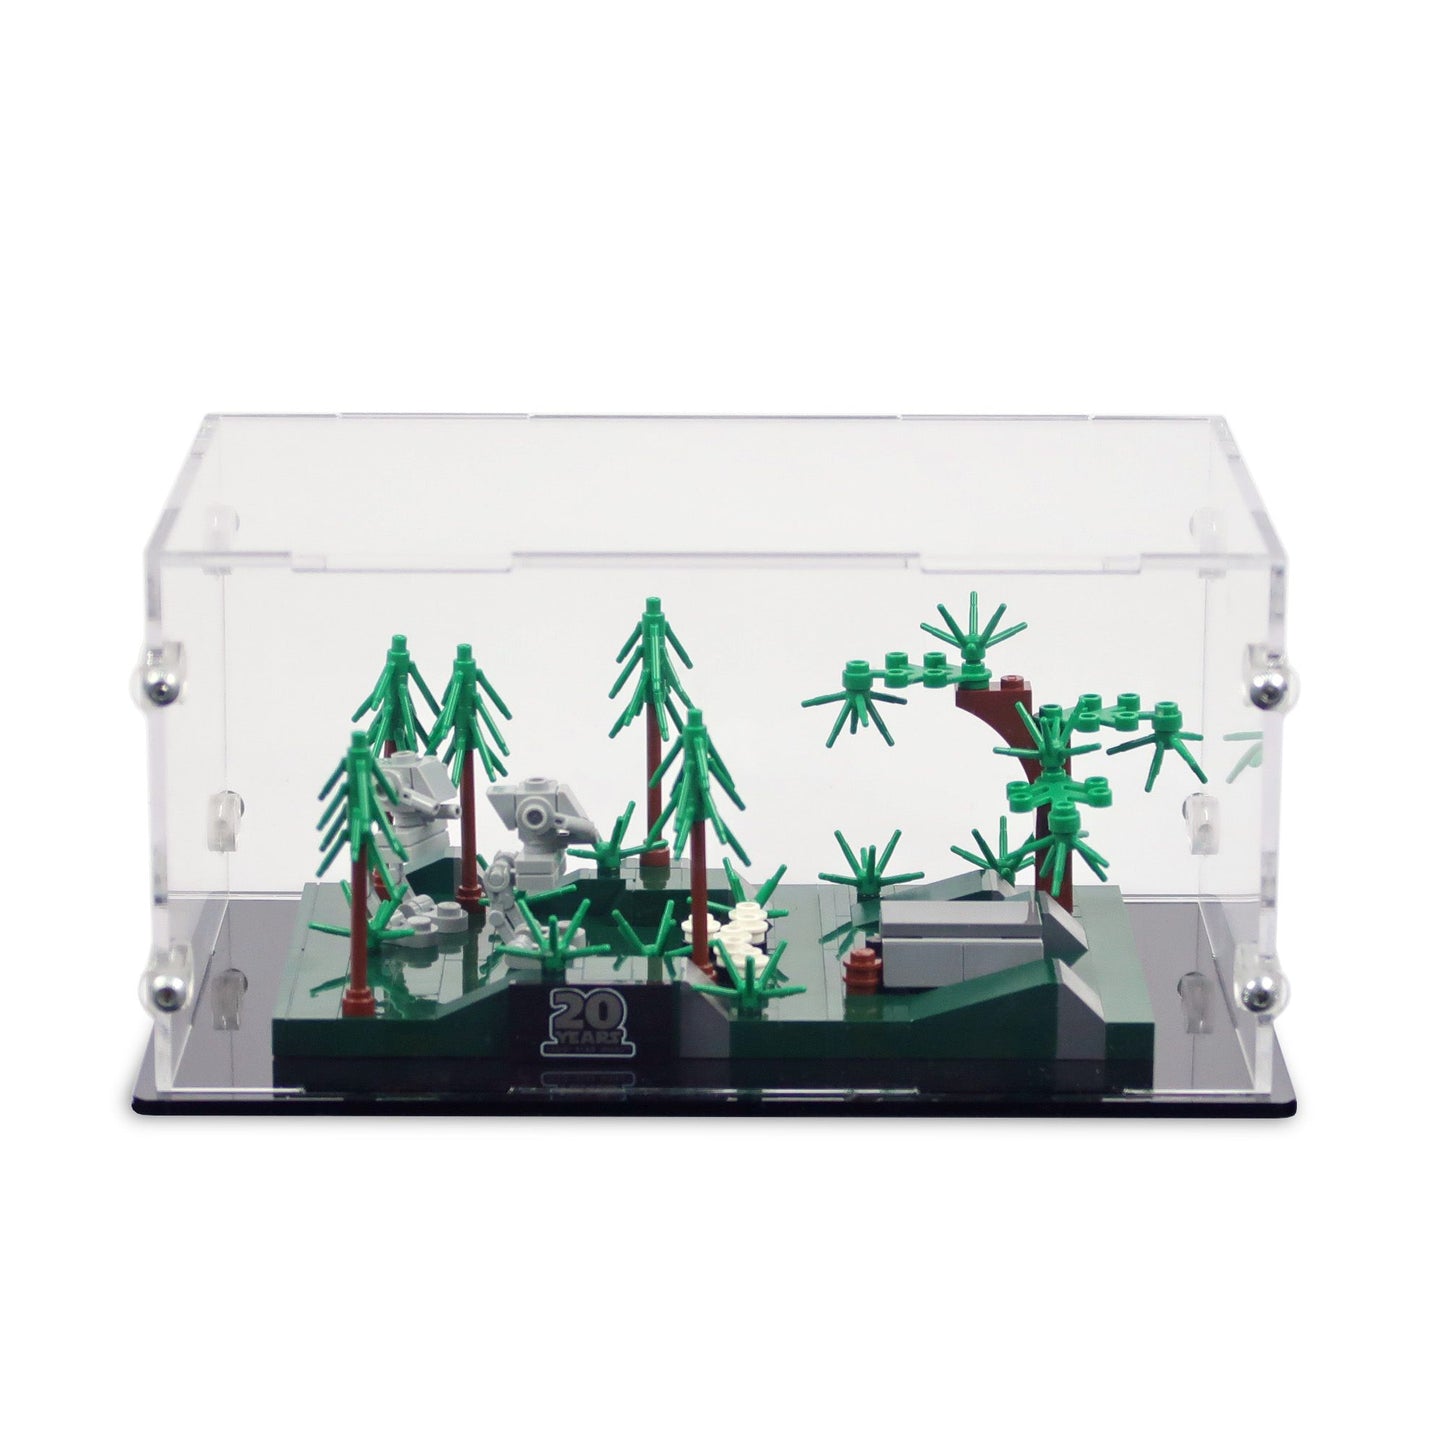 40362 Battle of Endor 20th Anniversary Edition Display Case